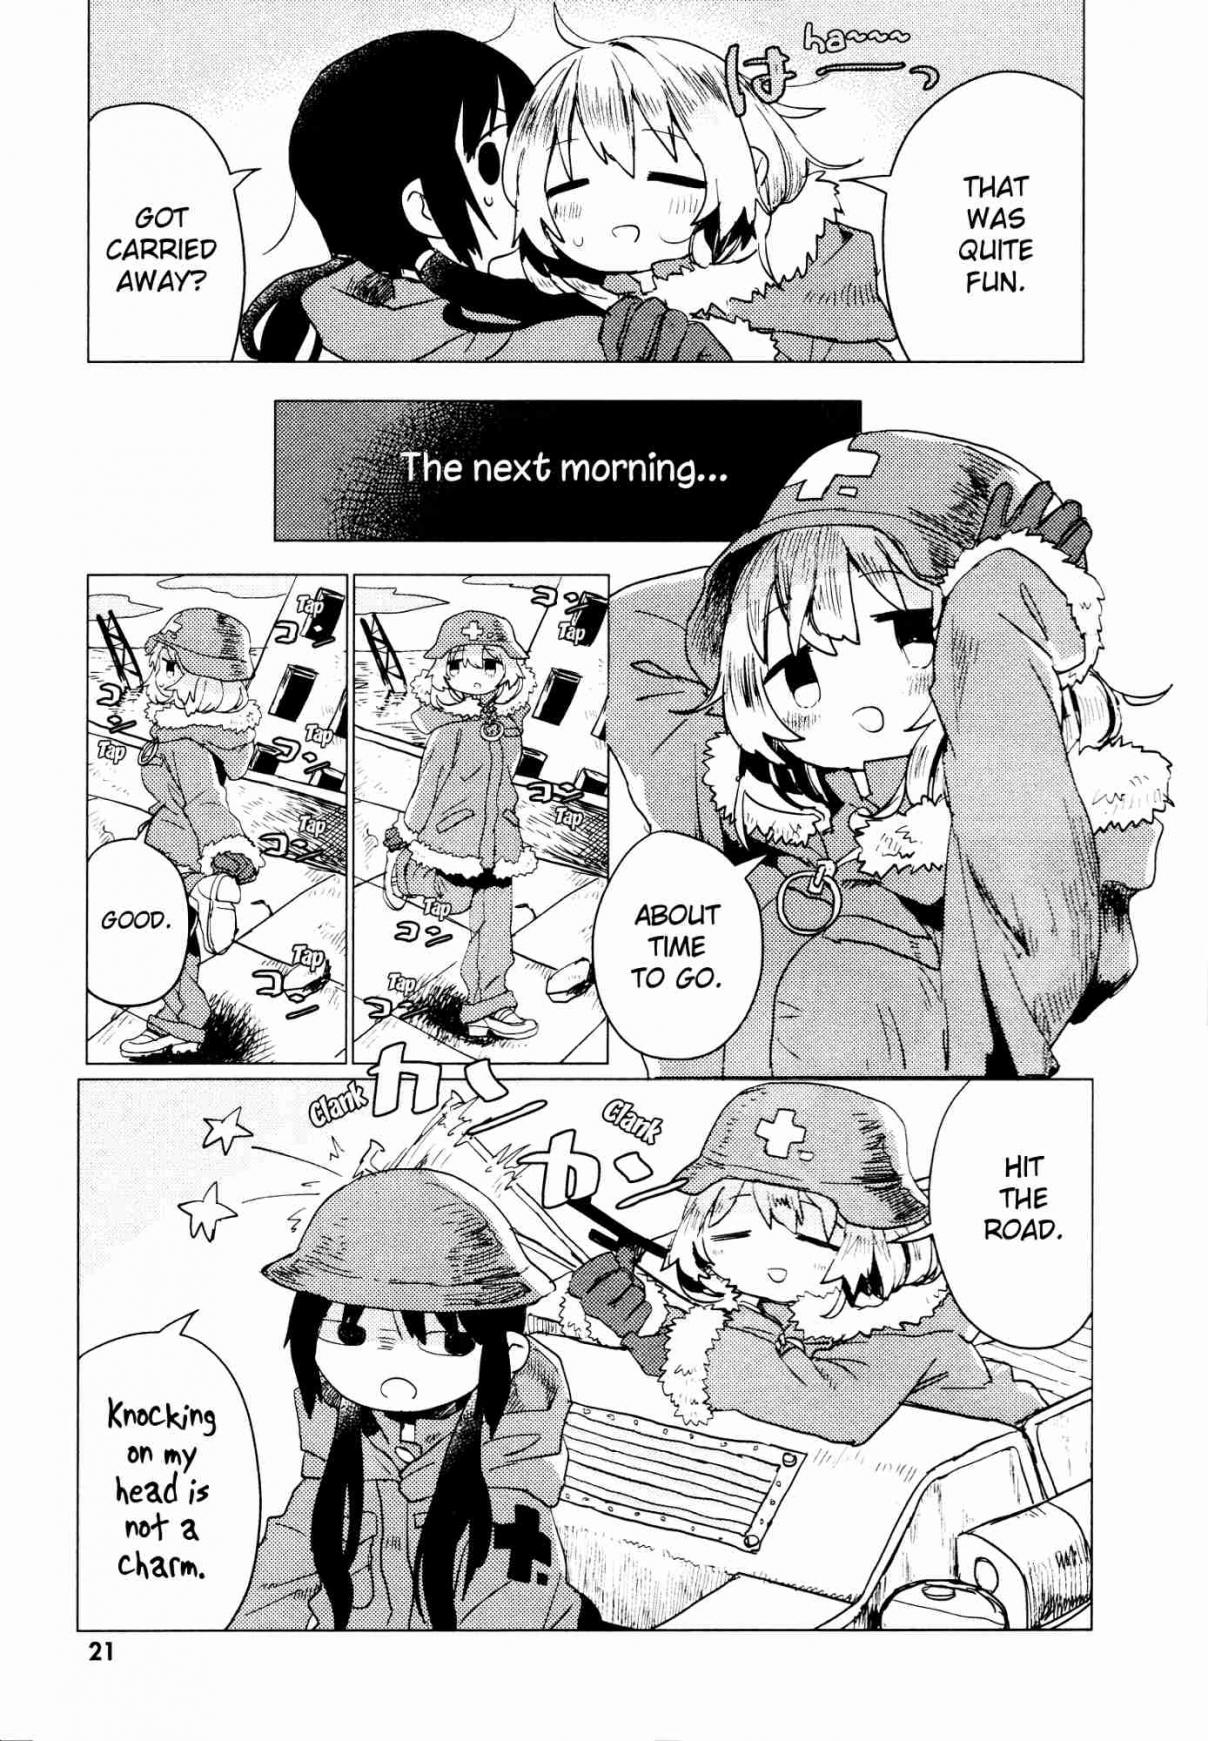 Girls' Last Tour Official Anthology Comic Ch. 2 Charm by Zinbei